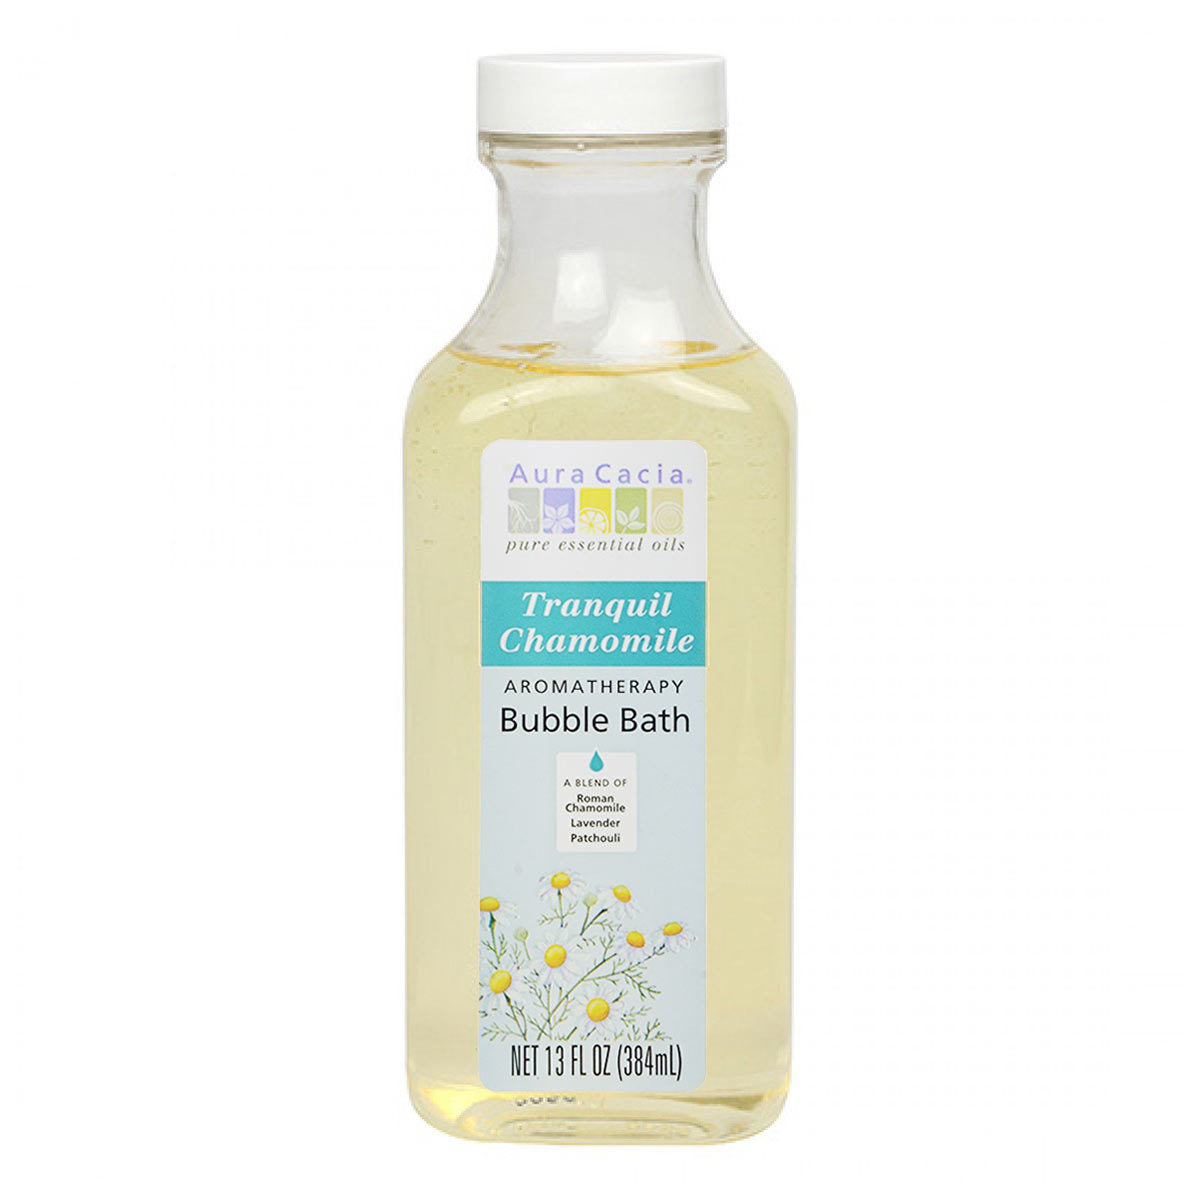 Primary image of Tranquil Chamomile Bubble Bath